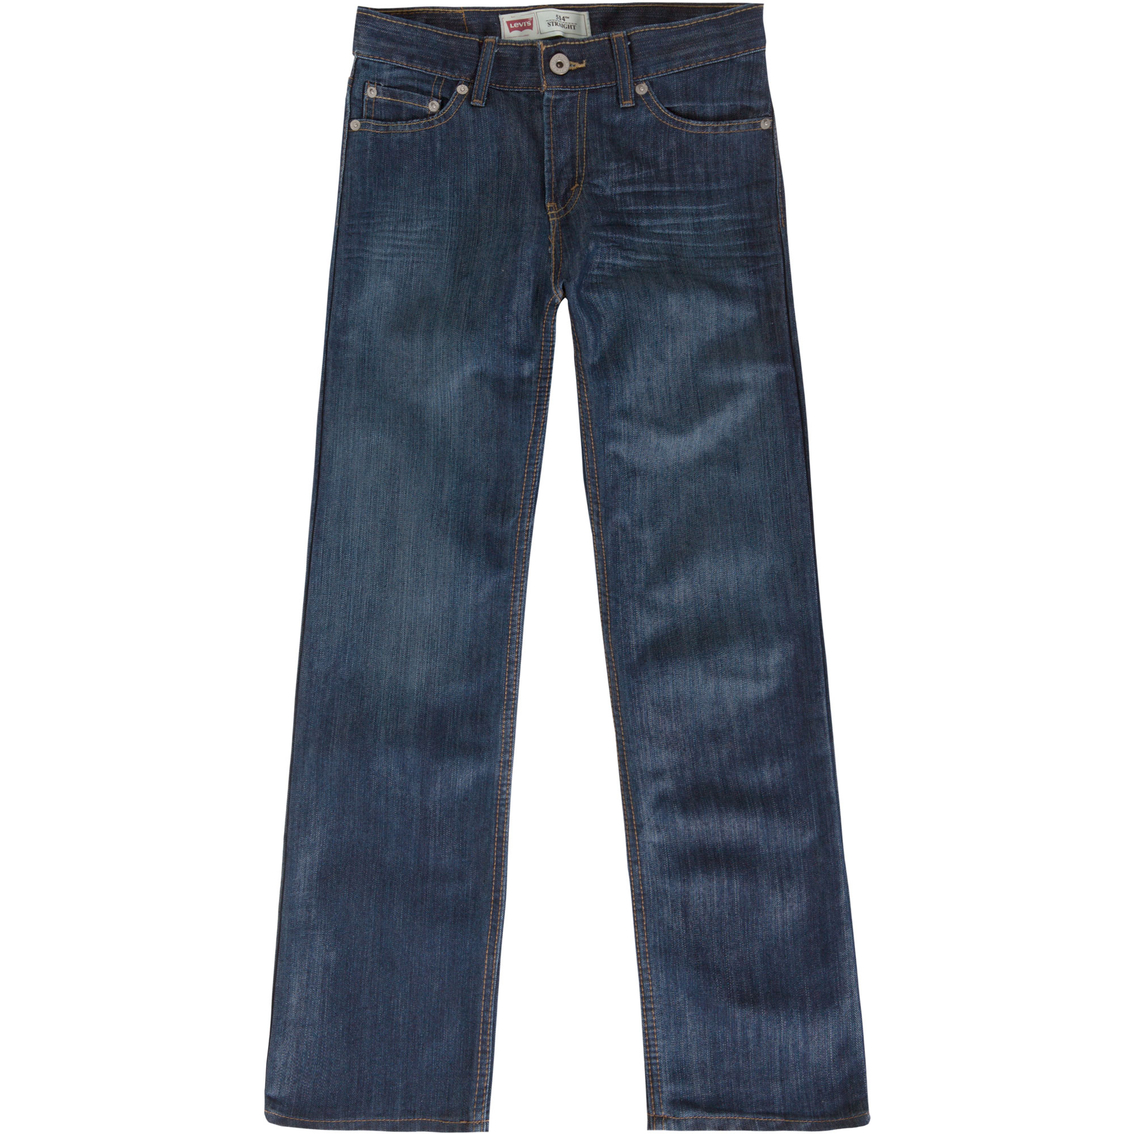 Levi's Boys 514 Straight Fit Jeans | Boys 8-20 | Clothing & Accessories ...